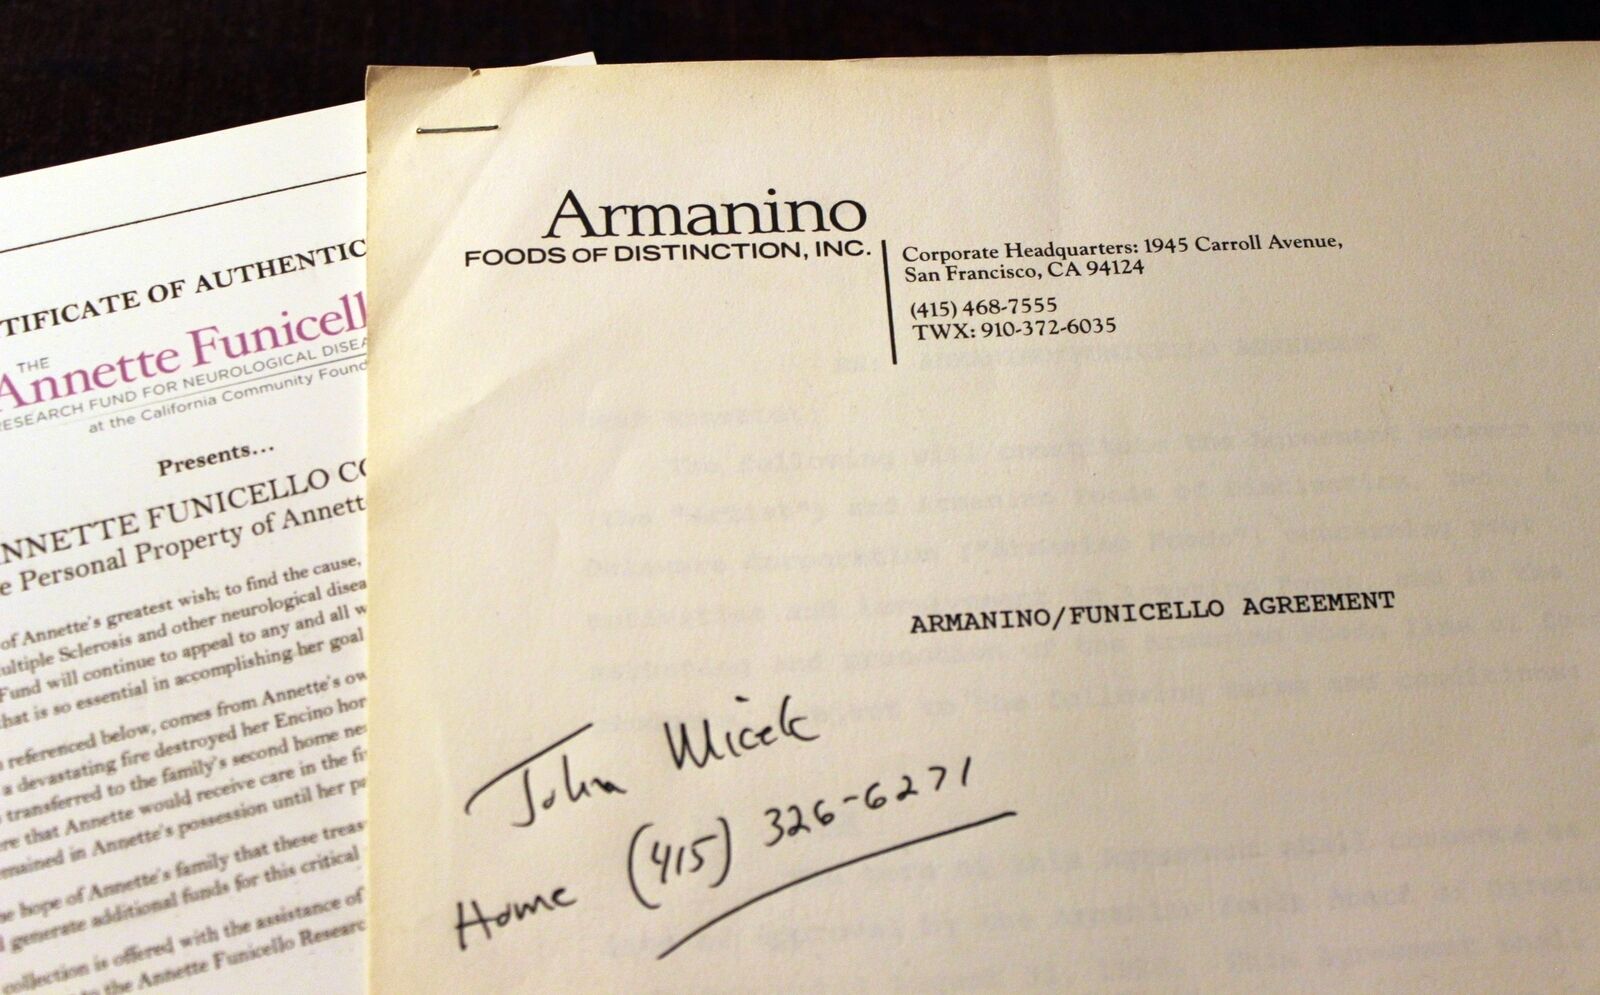 Annette Funicello Personal Property 1987 Armanino Pasta Sauce Contract Agreement